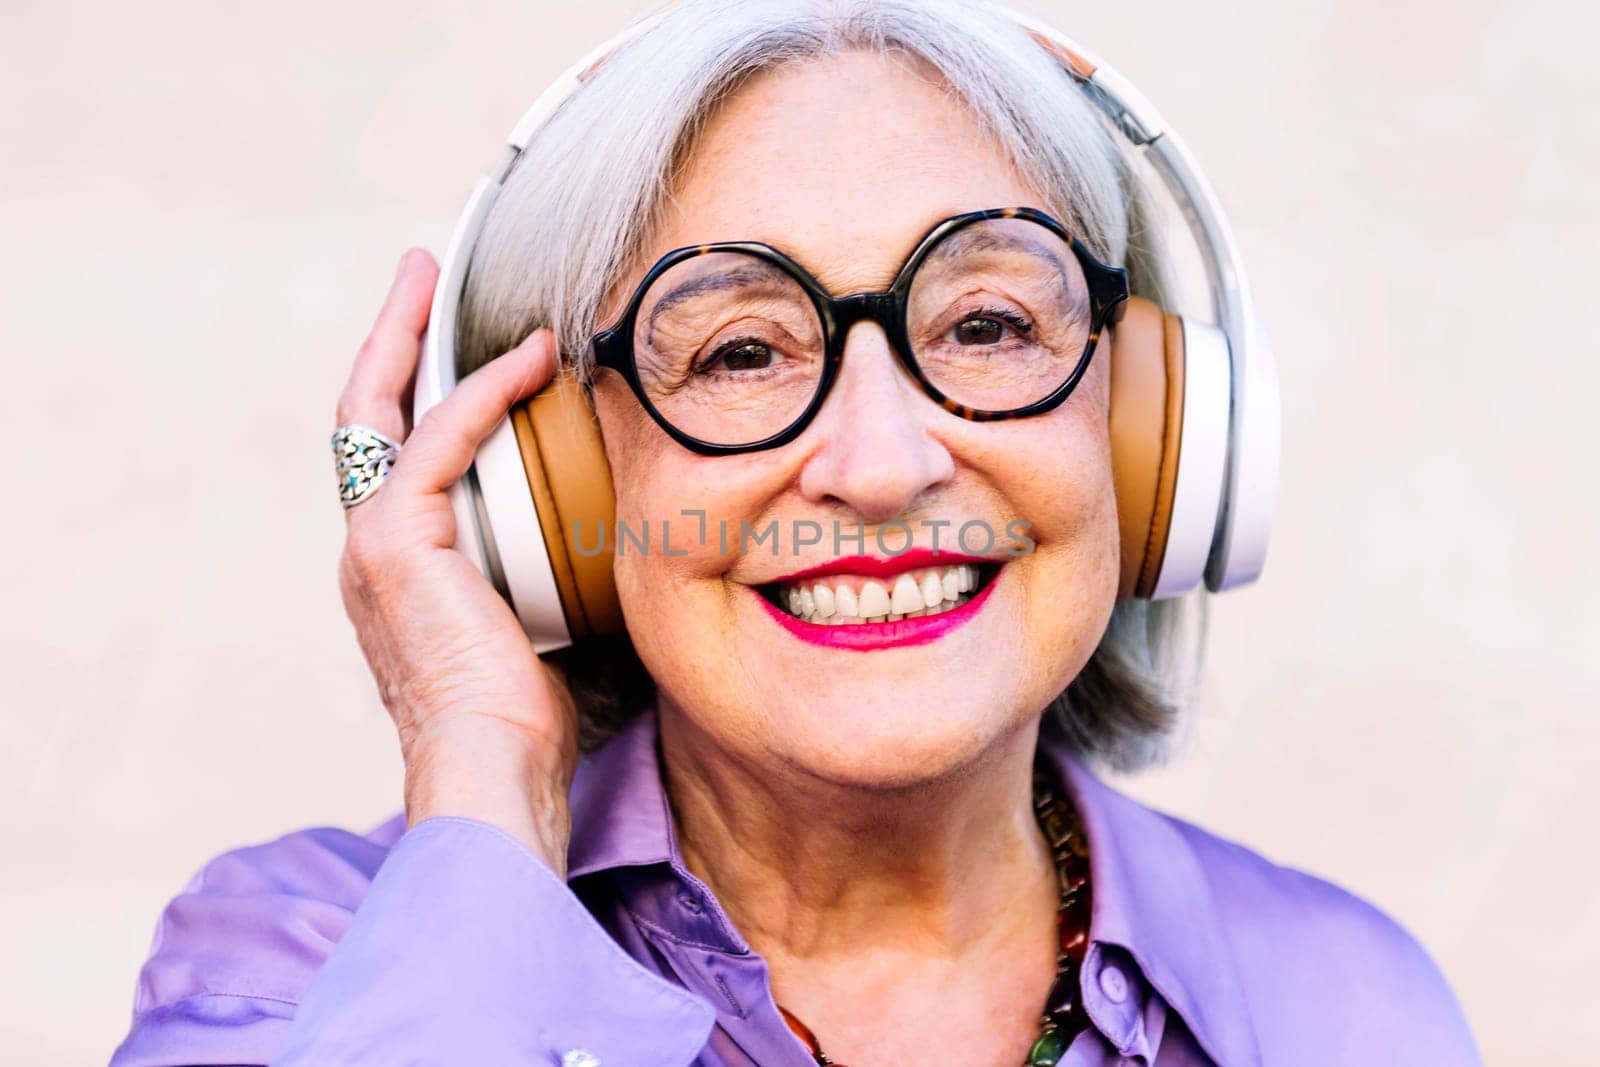 close up portrait of a smiling senior woman looking at camera enjoying listening to music in her headphones, concept of elderly people leisure and active lifestyle